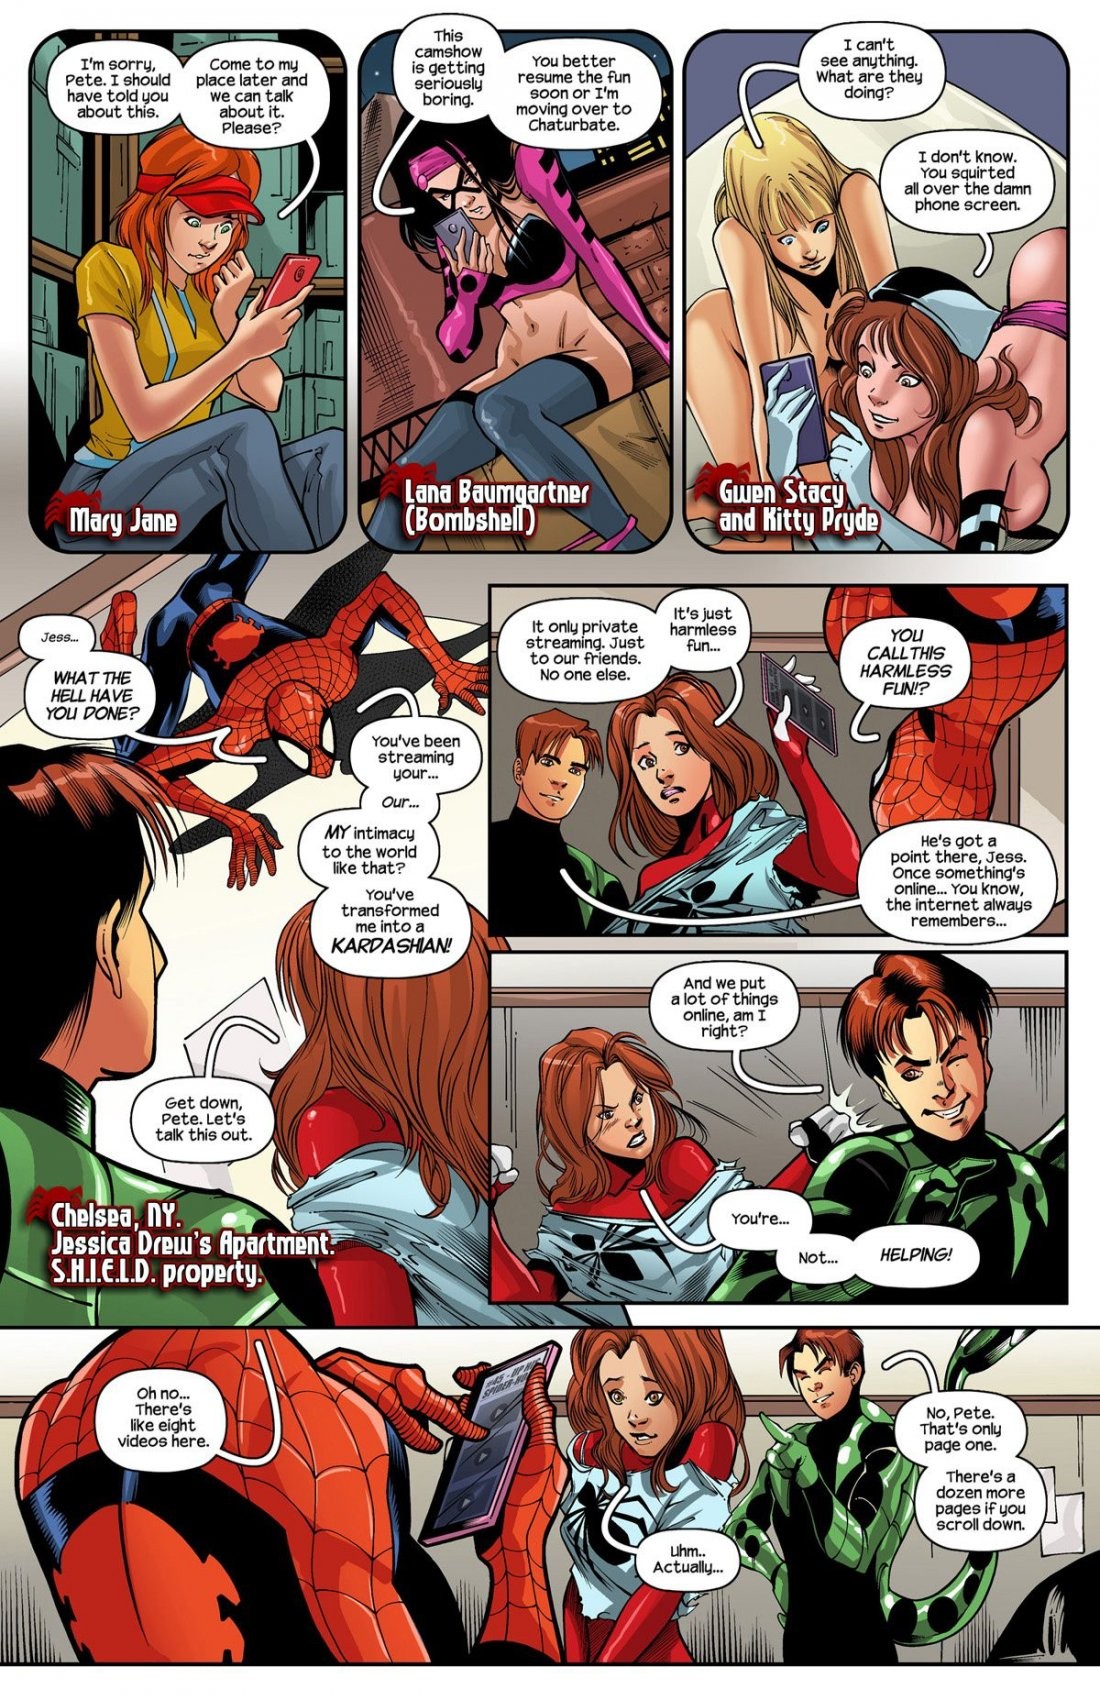 Ultimate Spider-Man XXX 12 - Spidercest - An itsy bitsy spider climbs up porn comic picture 3